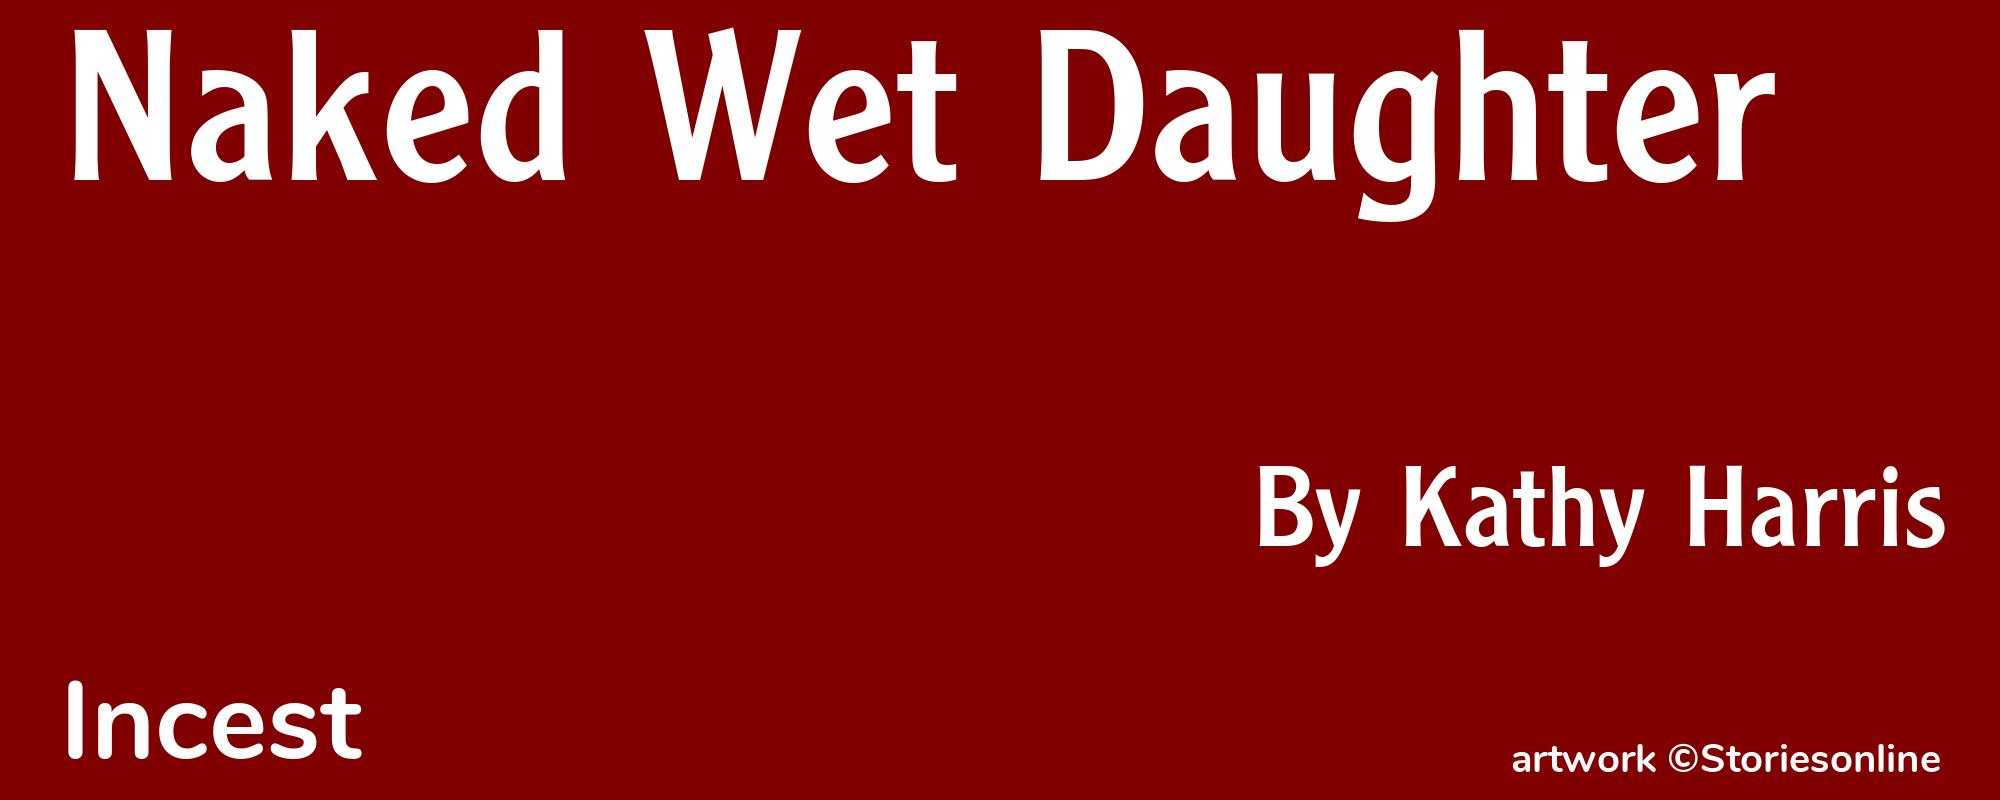 Naked Wet Daughter - Cover